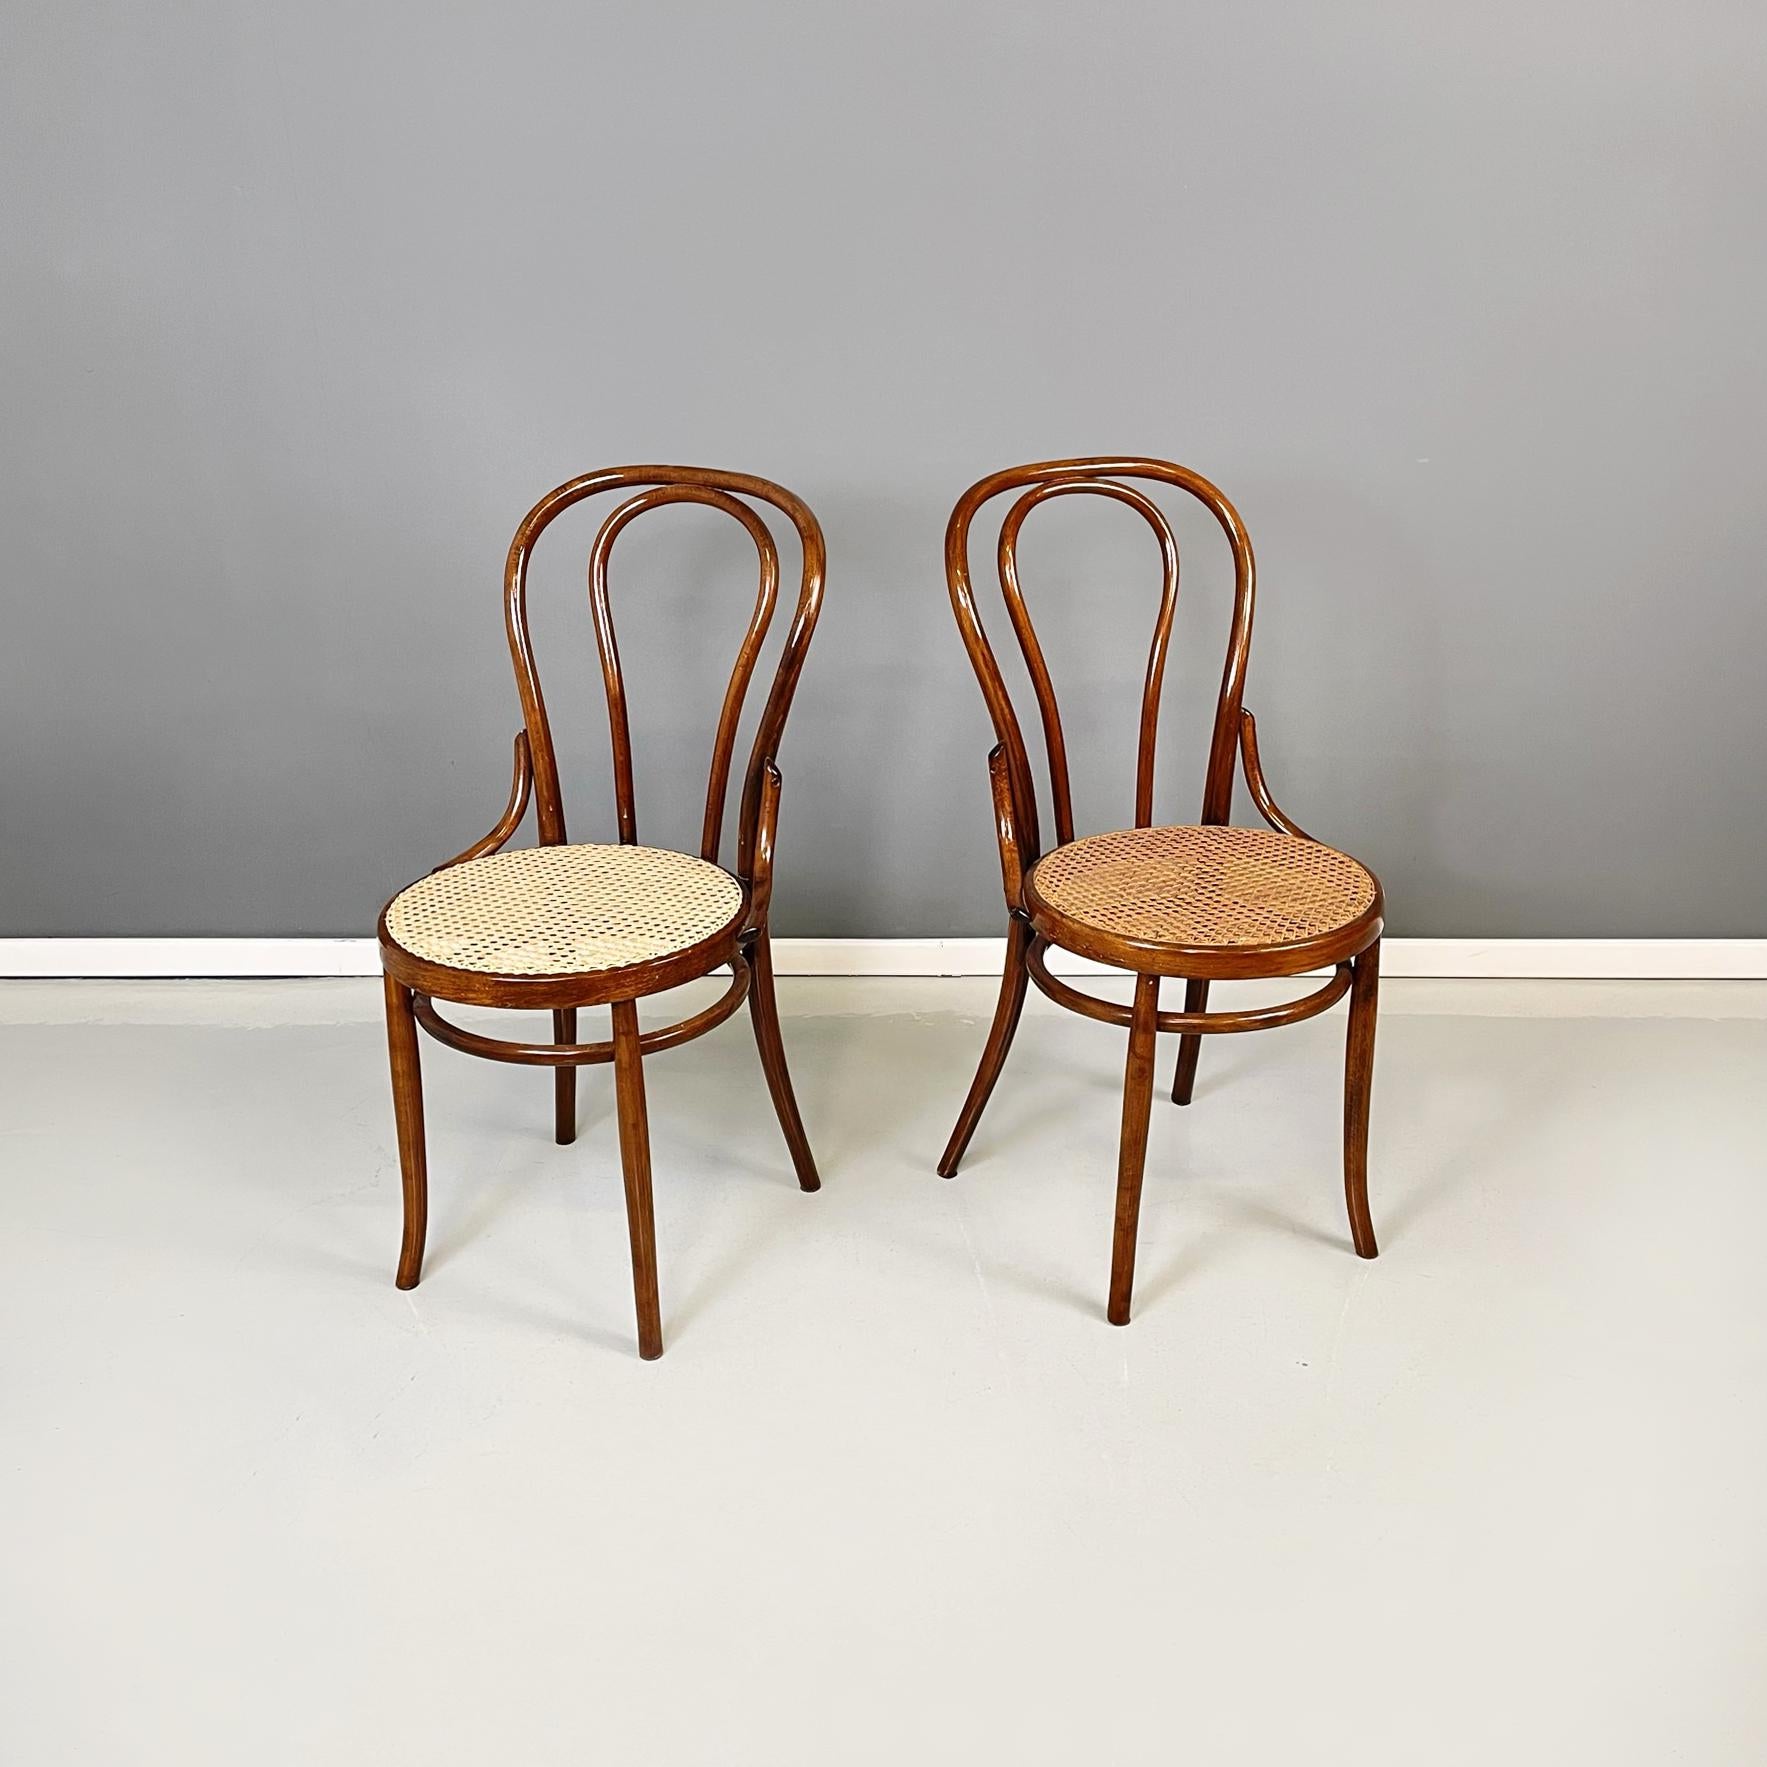 Austrian chairs Thonet style with straw and wood by Salvatore Leone, 1900s
Set of 6 chairs in Thonet style with round straw seat. The structure is in dark wood. The backrest is made of curved wood. The straws have different shades of color. 
They